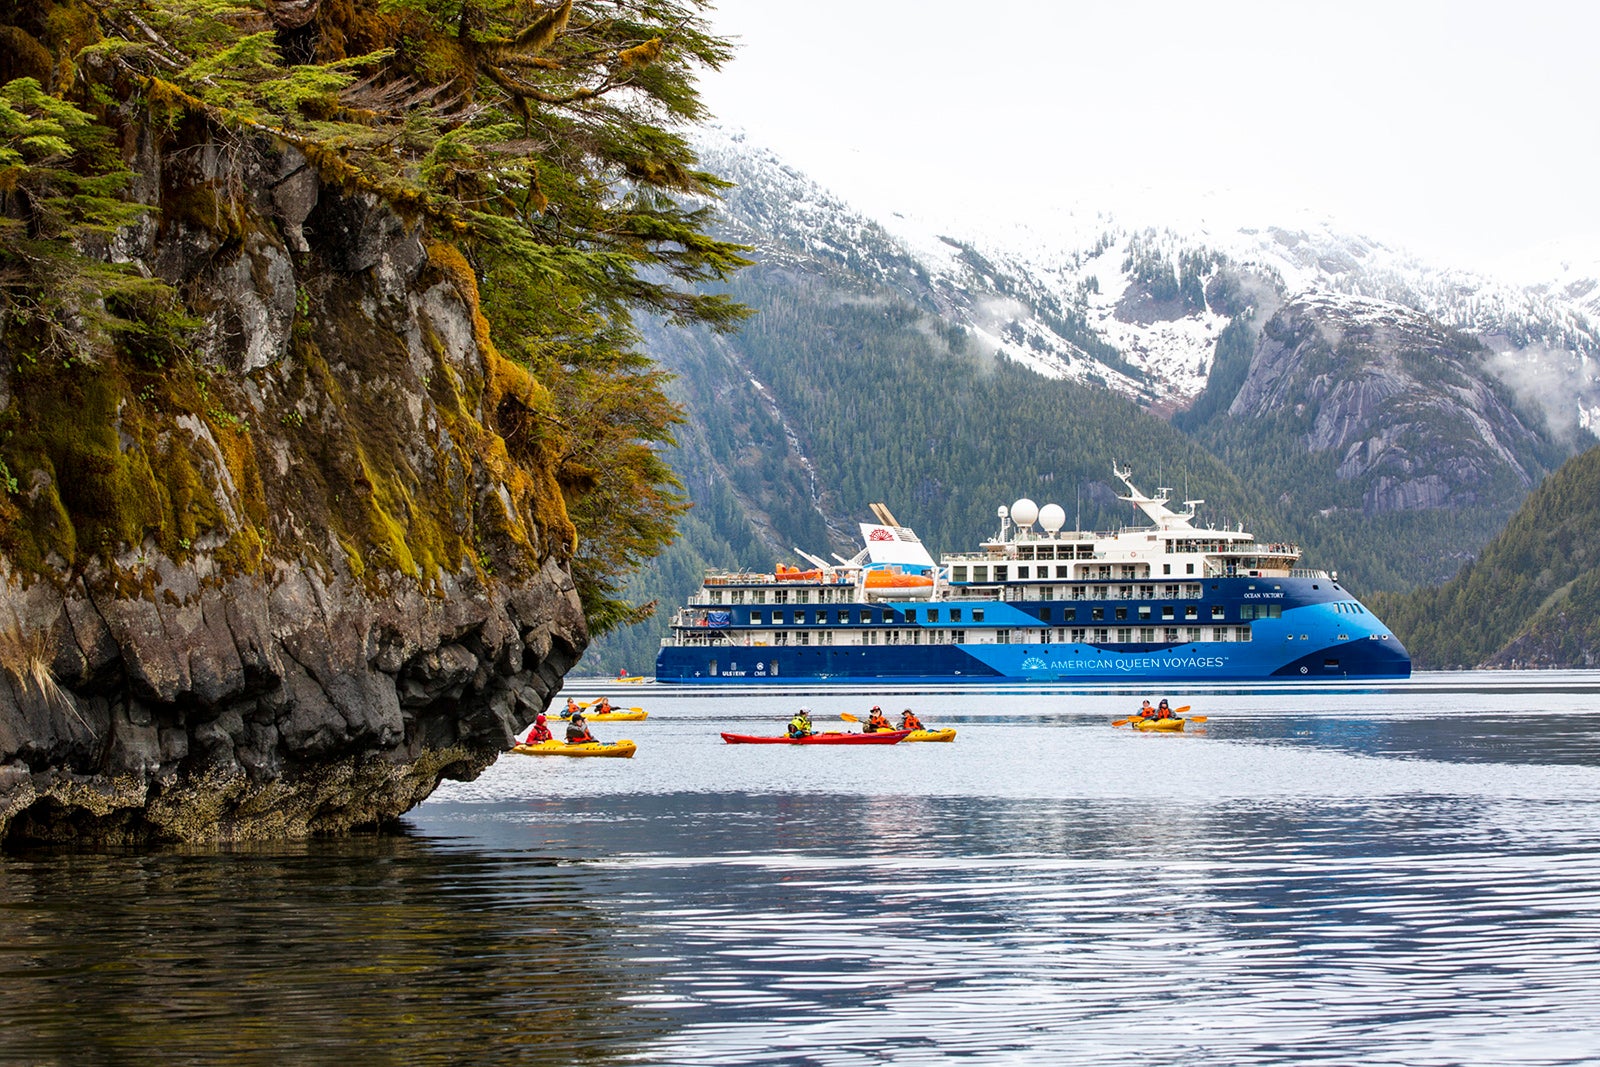 Looking for nature and adventure on an Alaska cruise? Choose a smaller